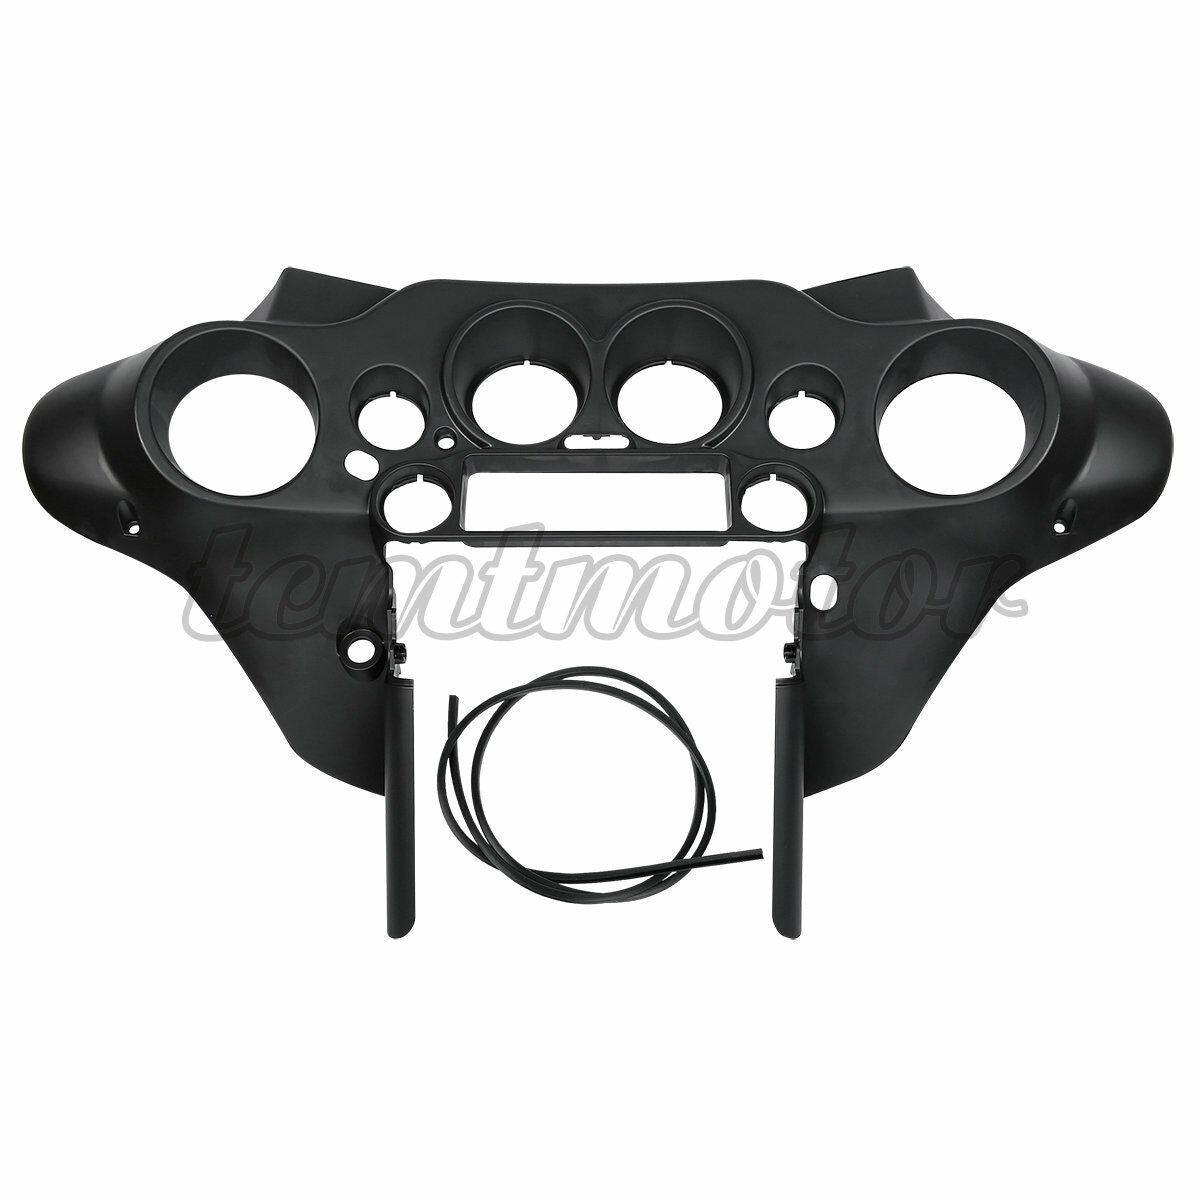 Batwing Inner & Outer Cowl Fairing For Harley Electra Street Glide FLH 1996-2013 - Moto Life Products